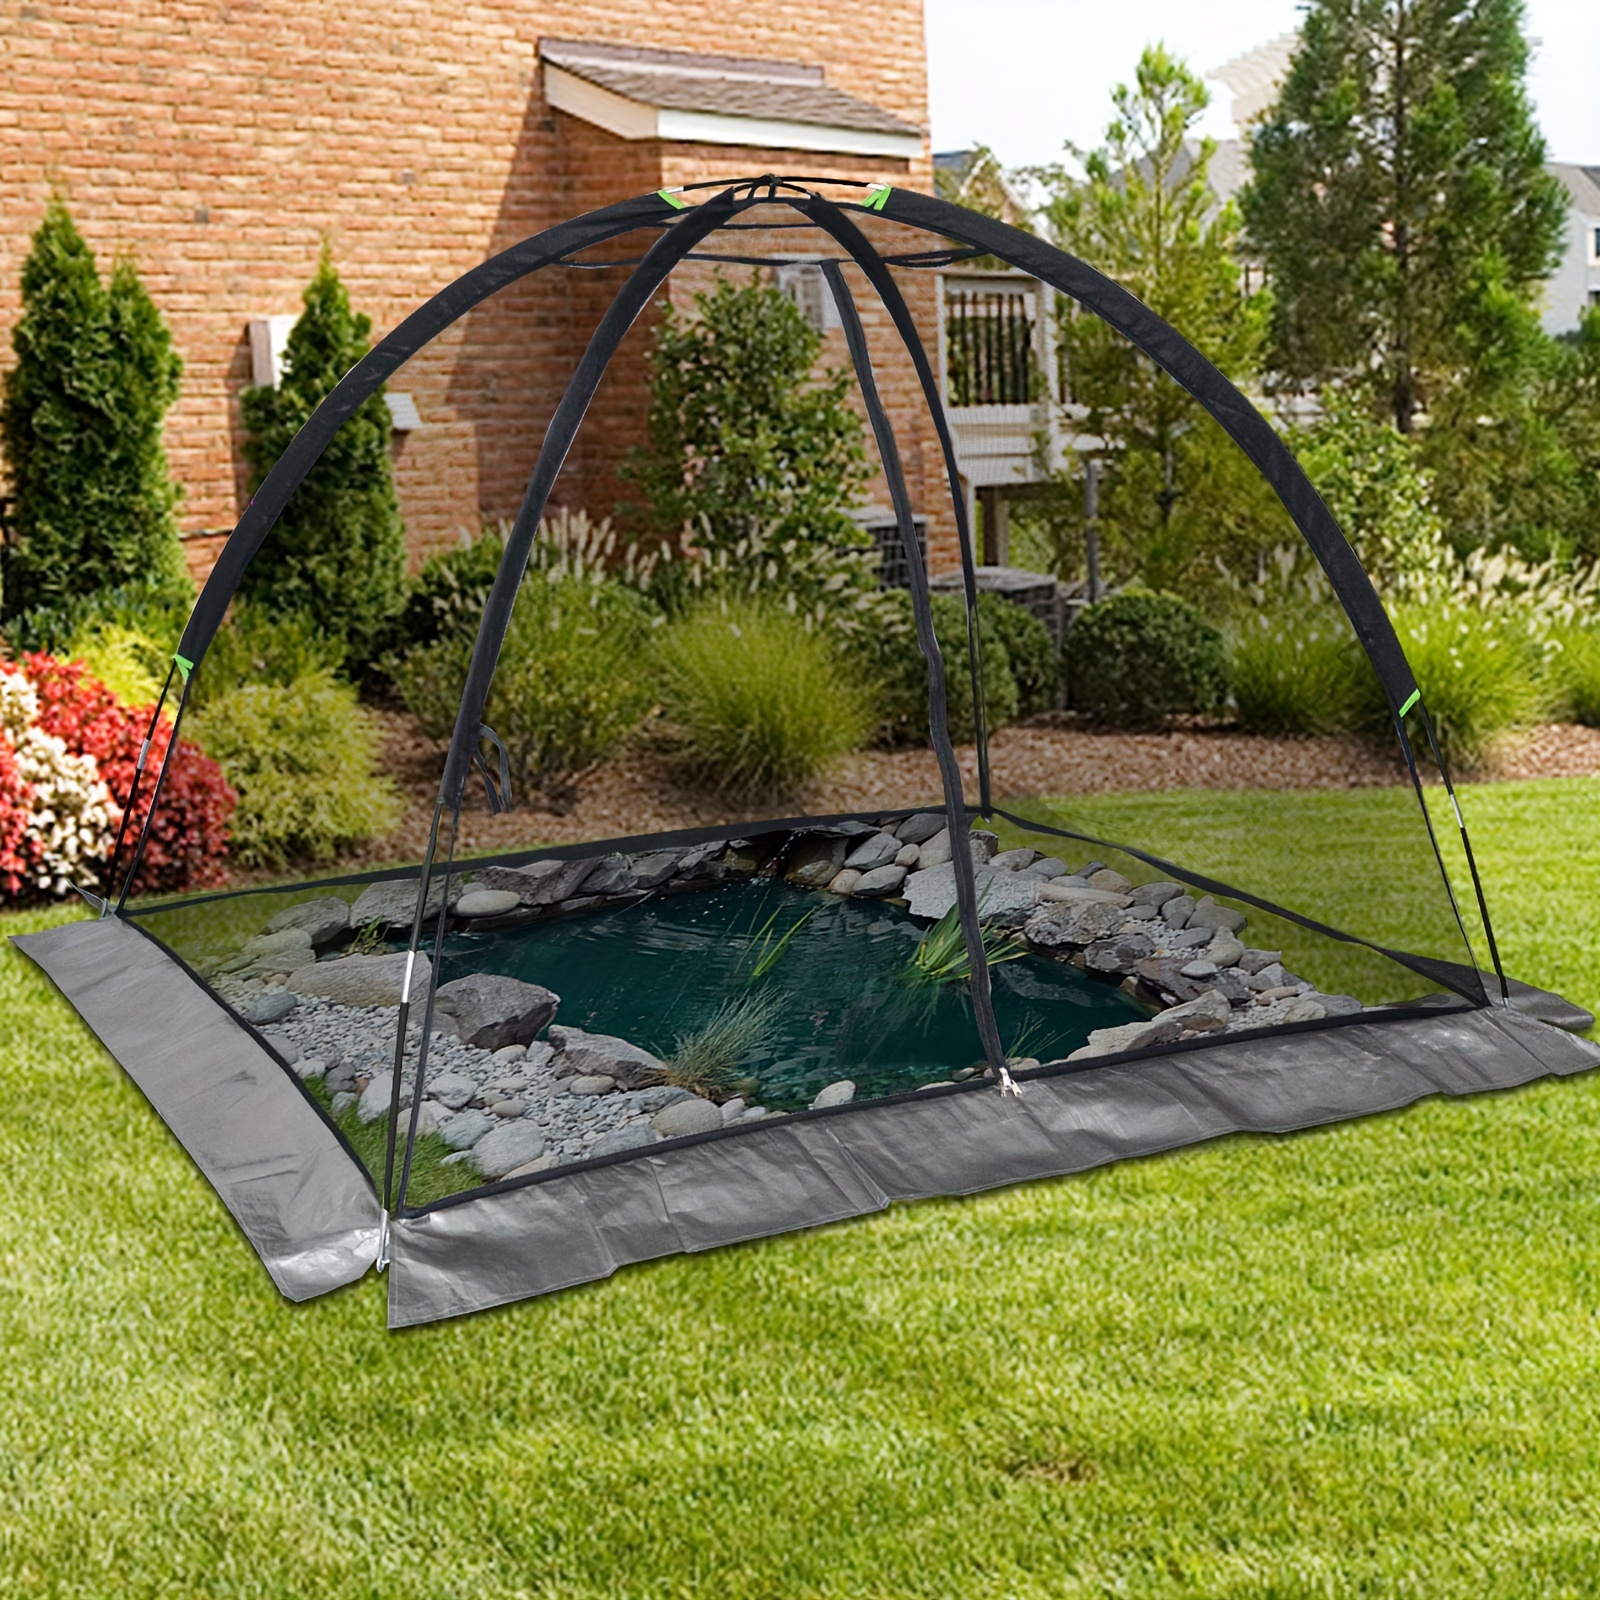 

Kapler Pond Garden Cover Dome Net 7x5ft Backyard Pond Covers For Outdoor Leaves Winter Ponds Netting With Zipper And Stakes Nylon Mesh Protective Garden Netting Covering Tent For Fish Pool